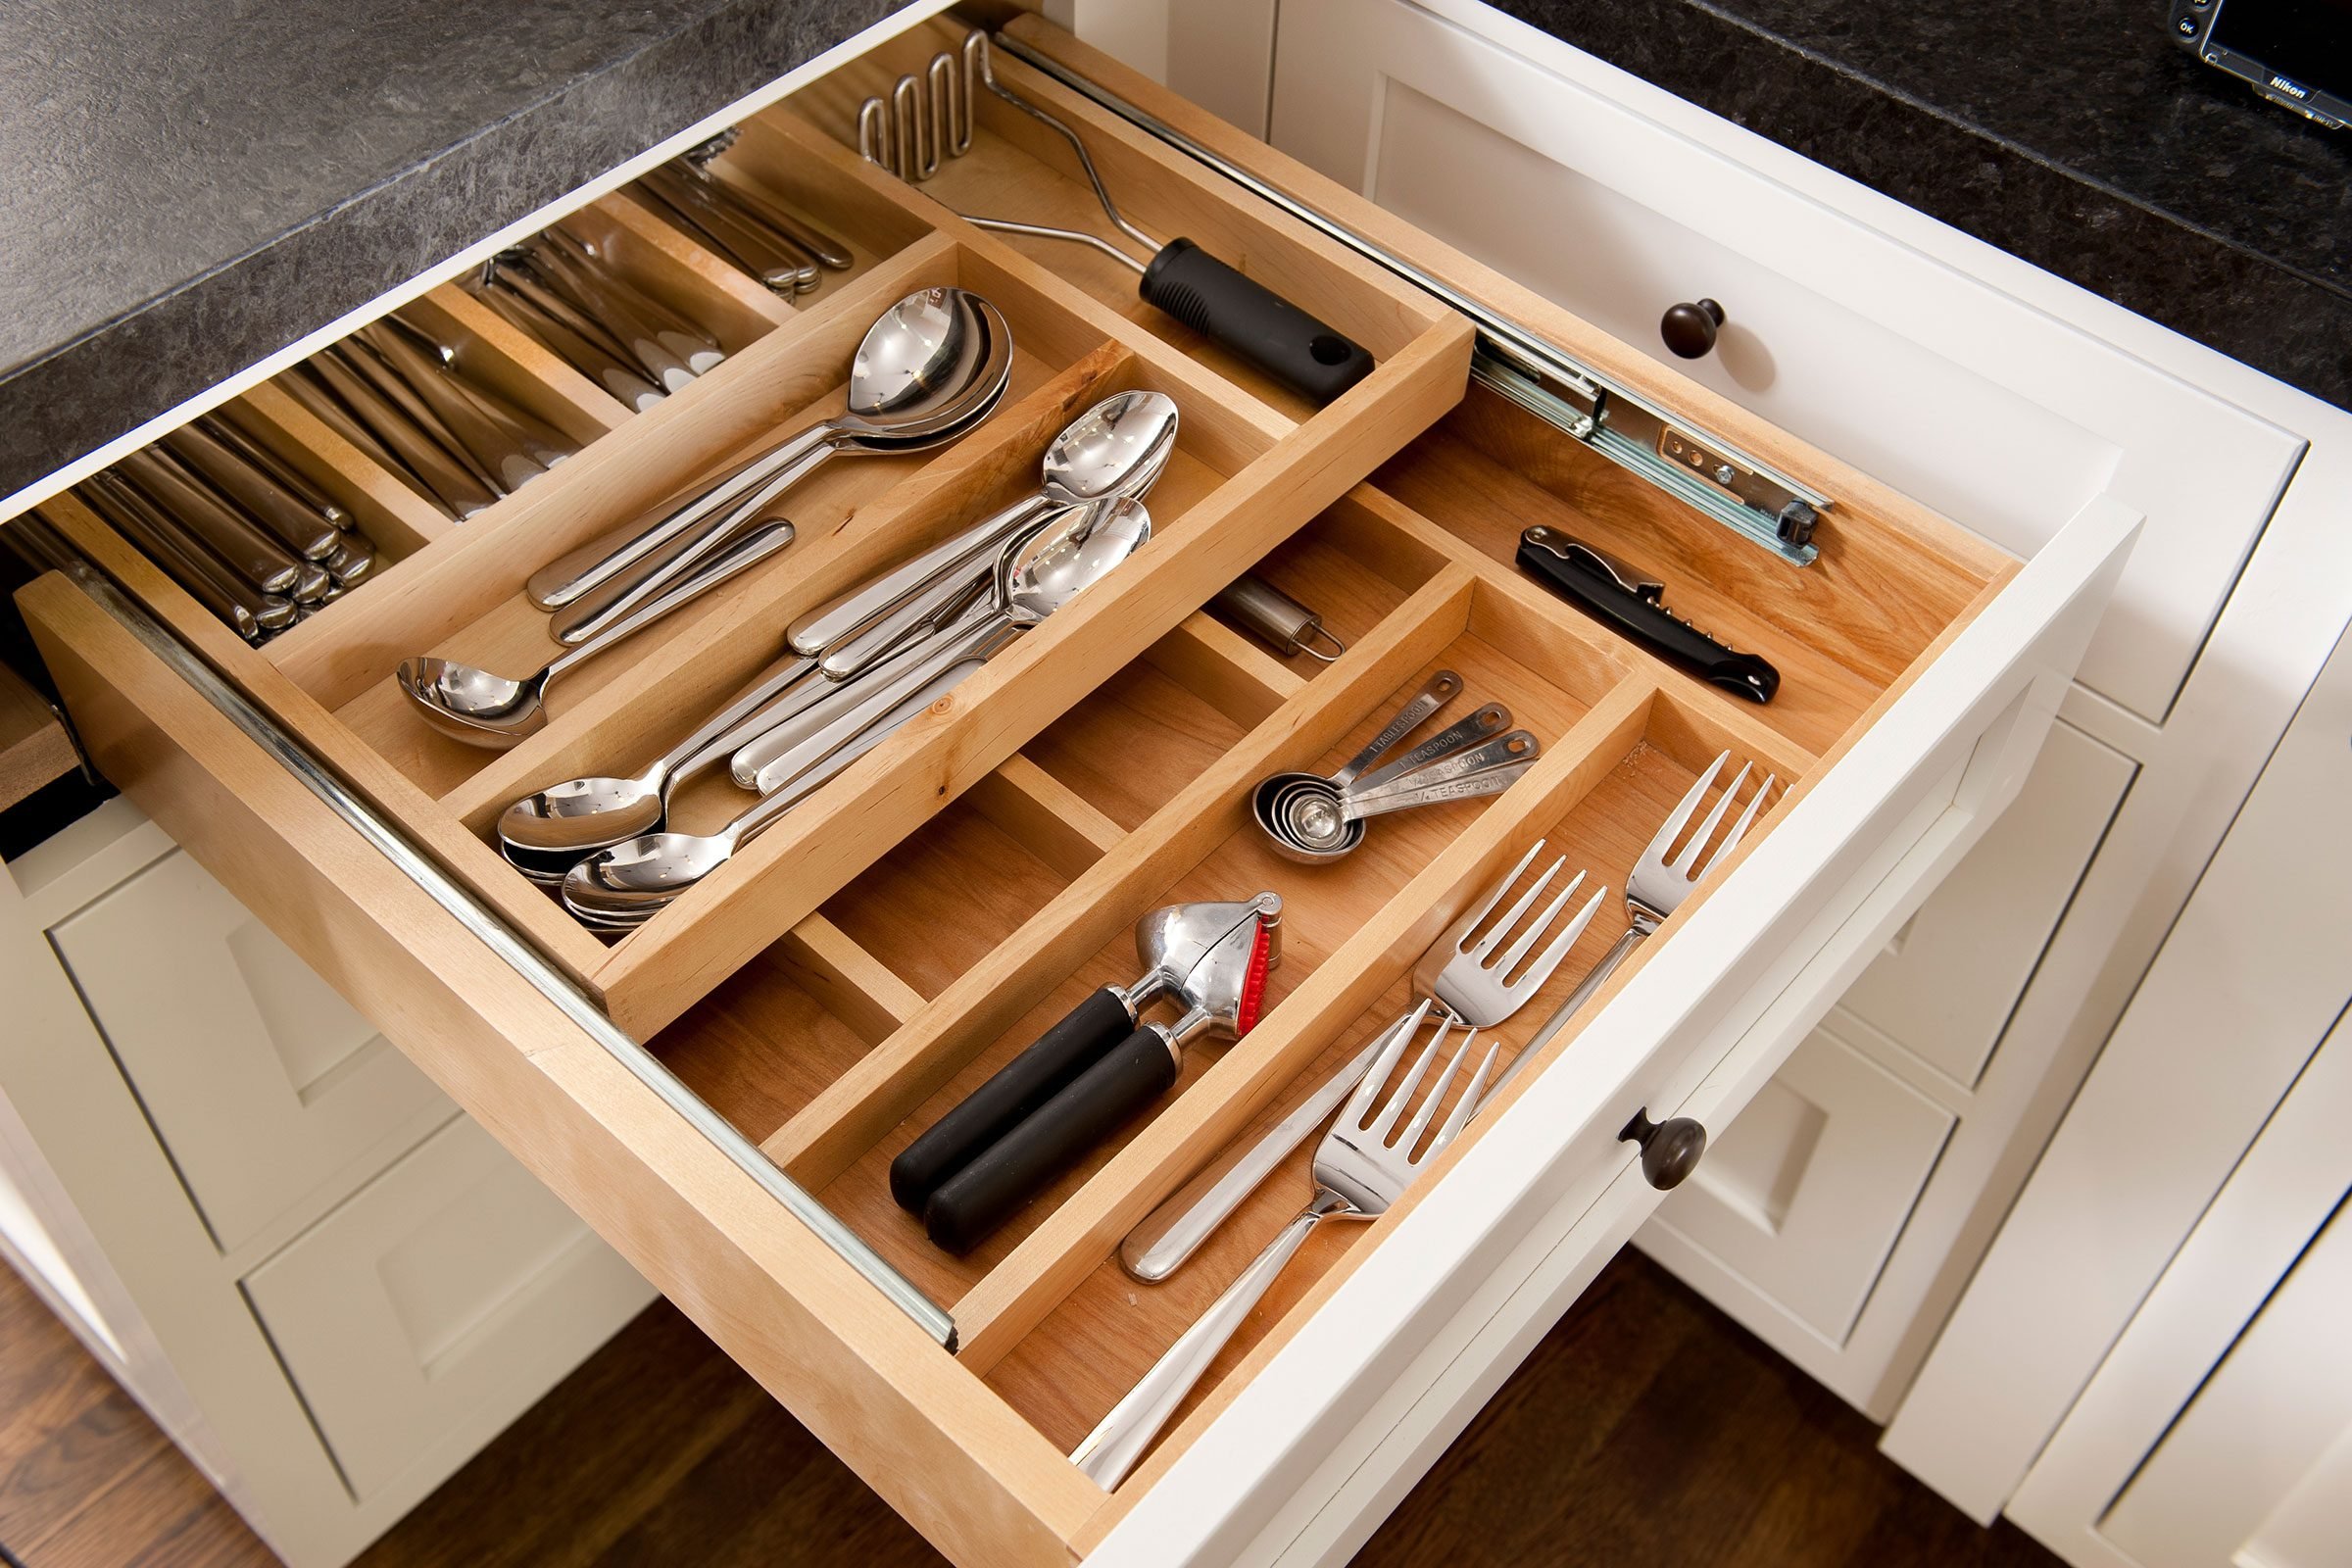 https://www.familyhandyman.com/wp-content/uploads/2023/01/GettyImages-178952317-Ikea-Double-Drawer-Storage-Hack-DH-FHM.jpg?fit=700%2C1024